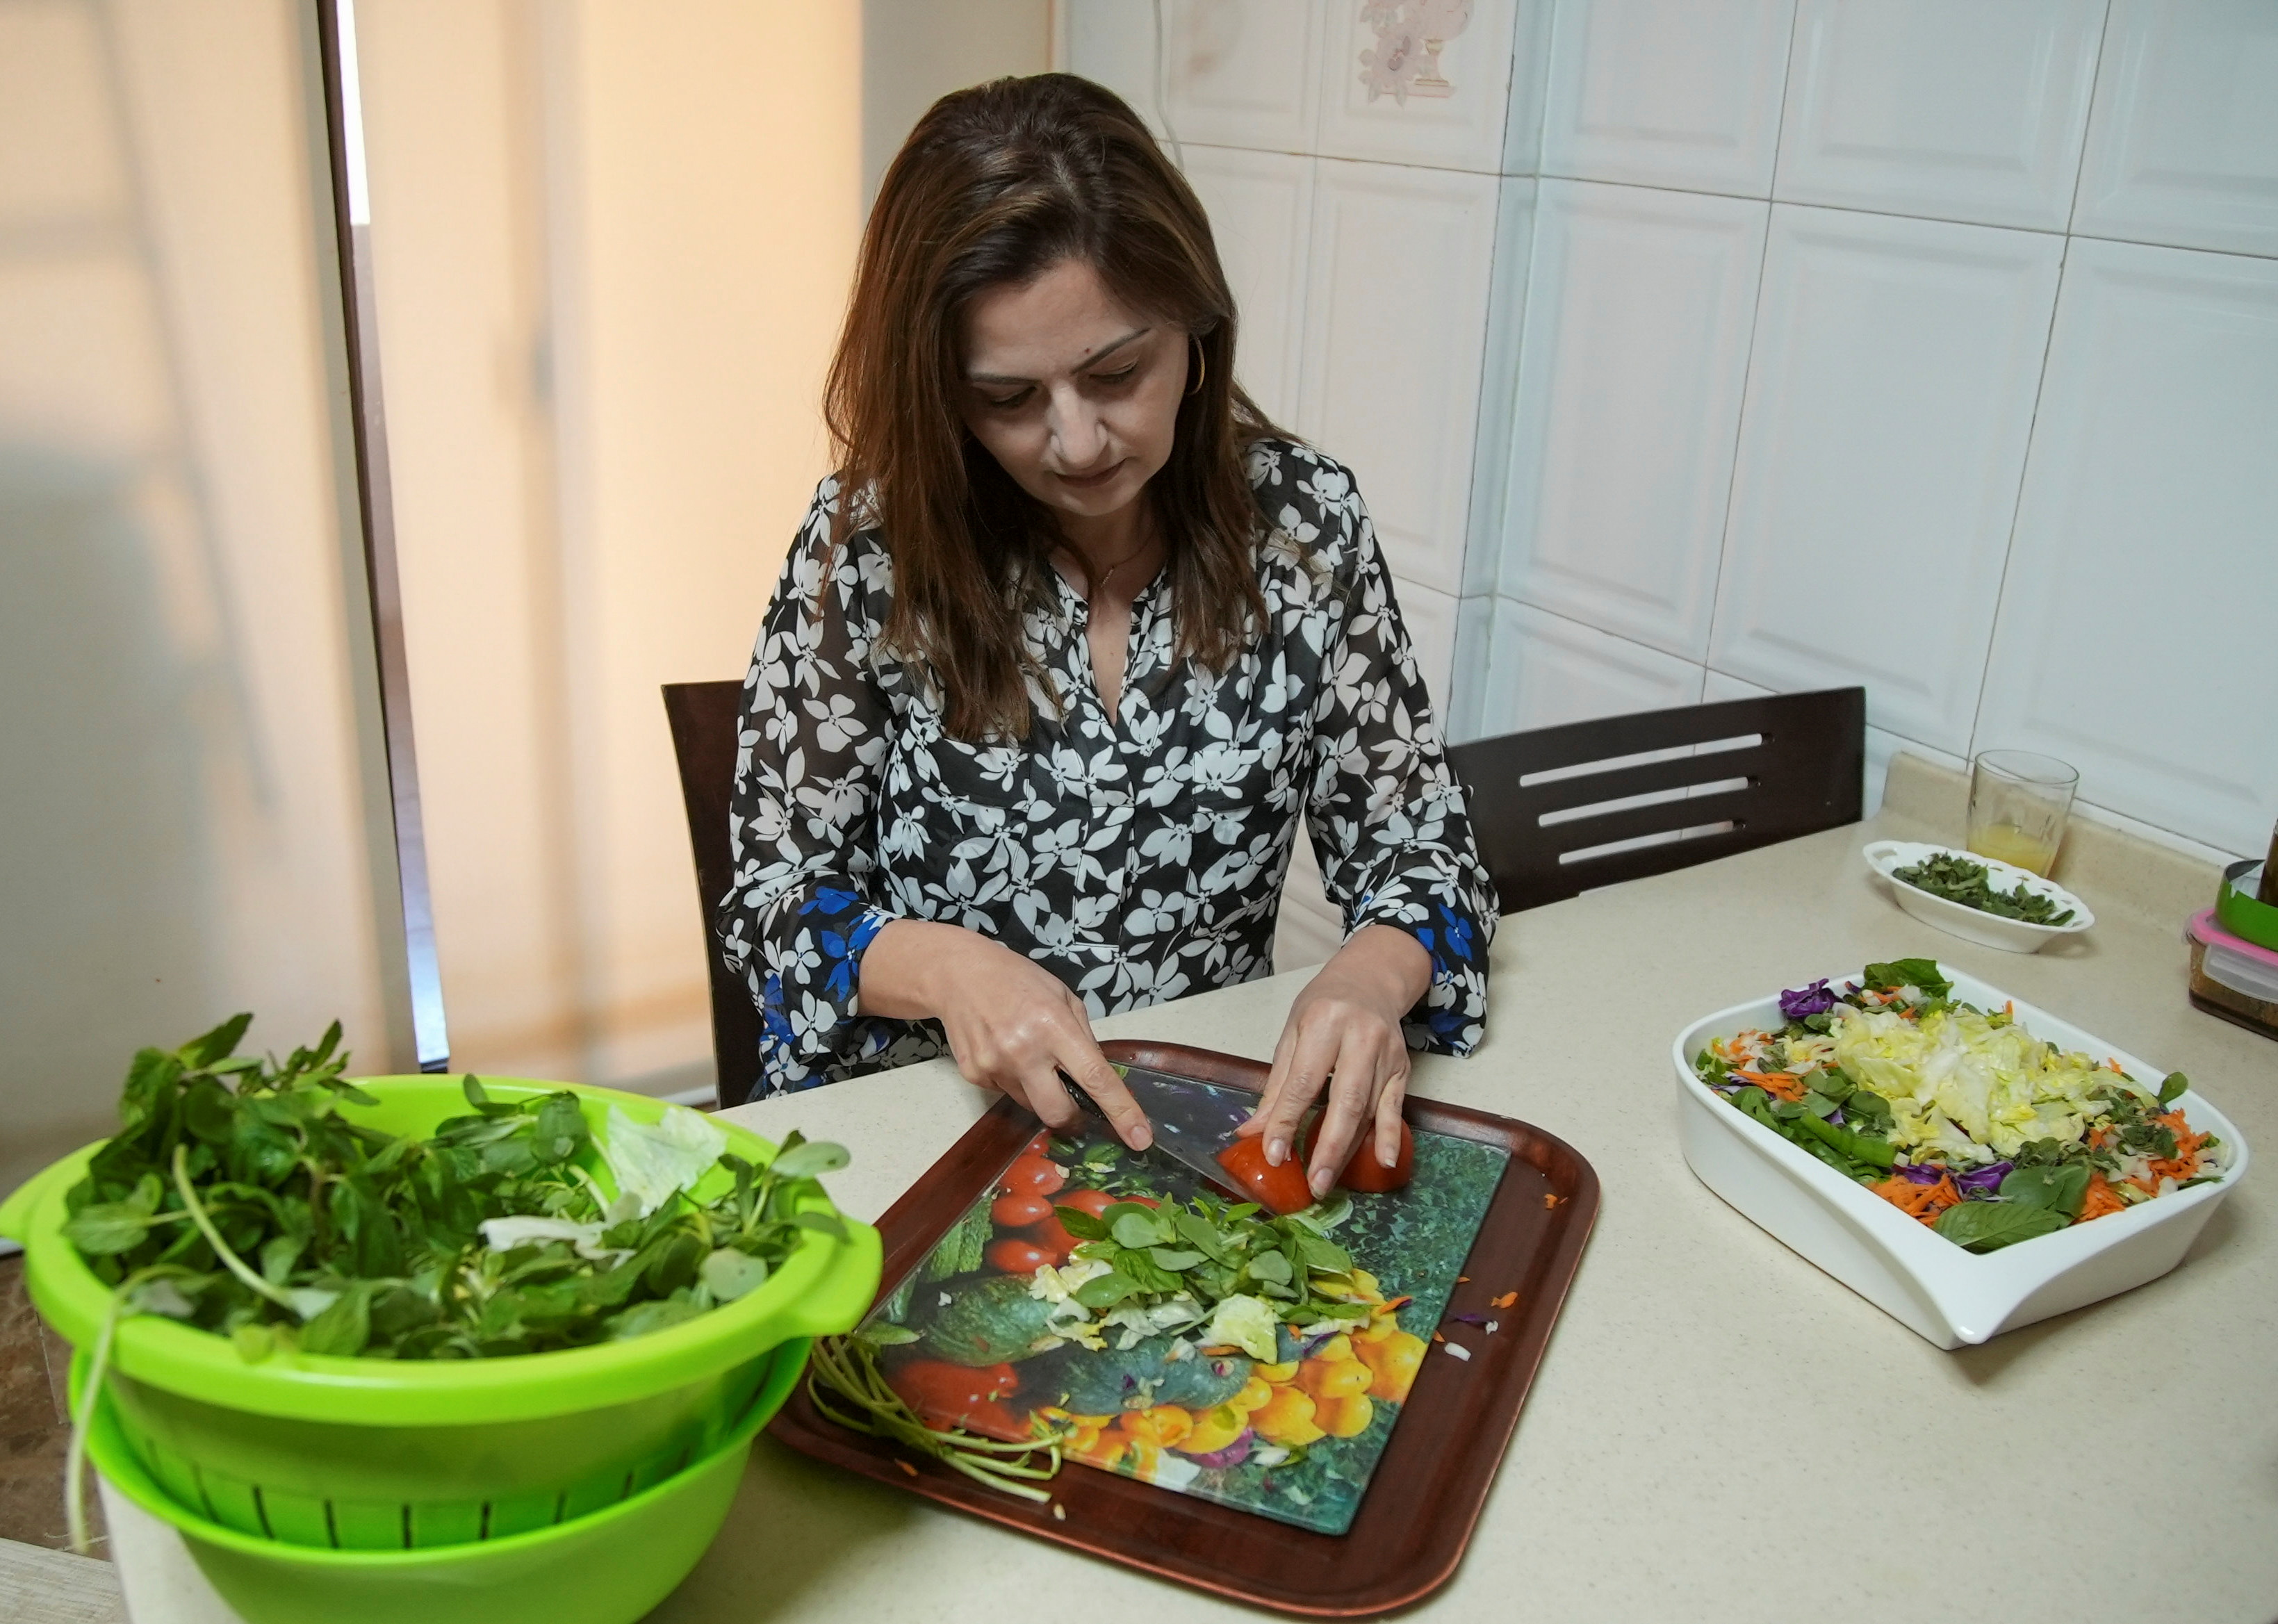 Hala Sheikh prepares Fattoush, a popular salad, at her house in Beirut